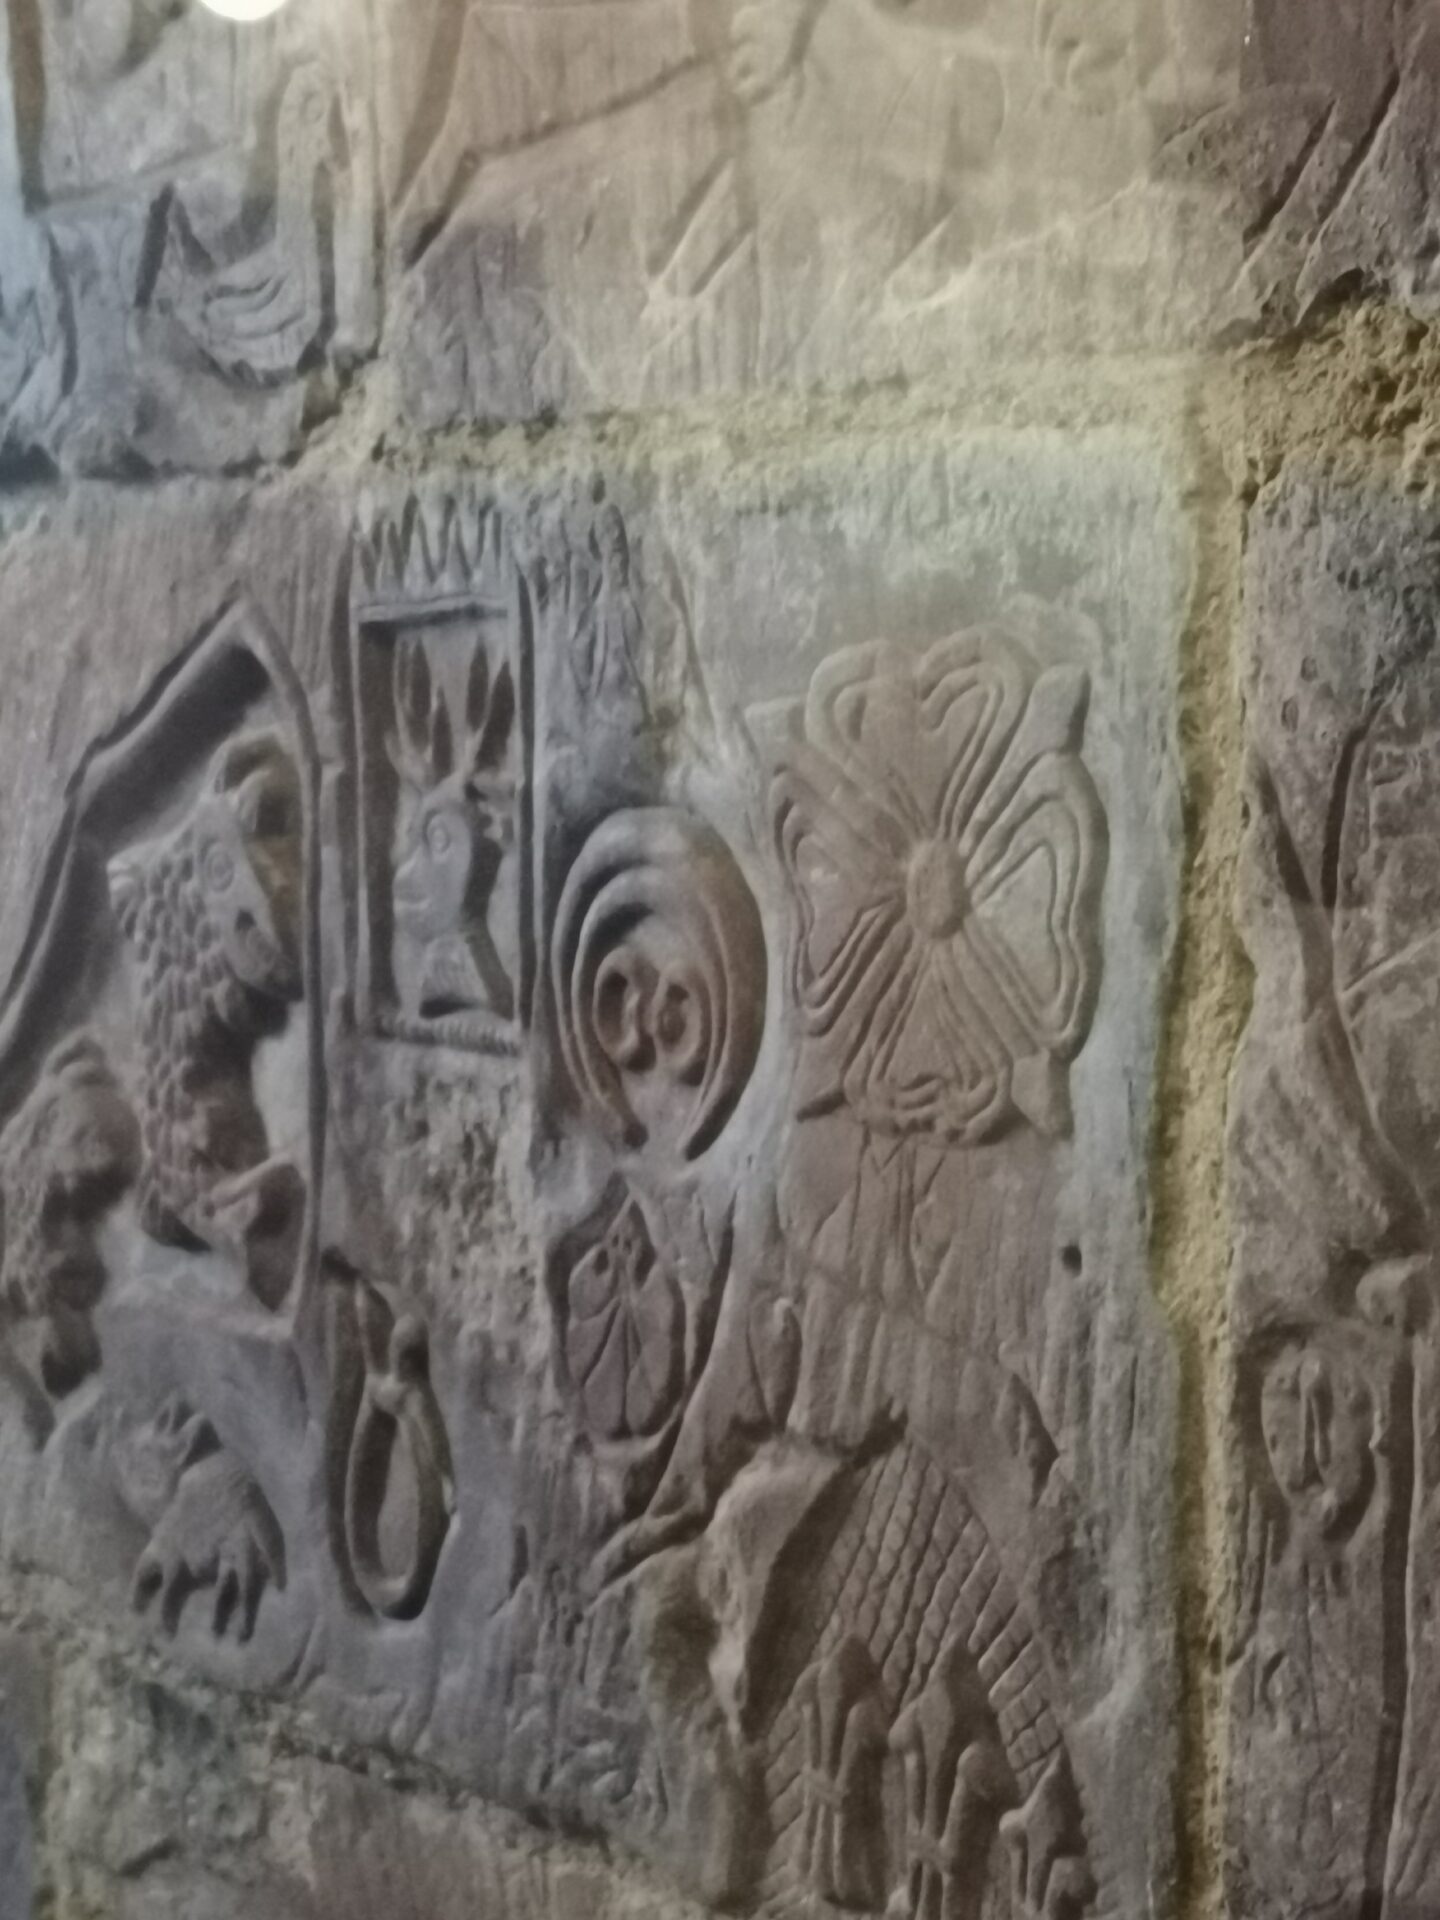 Carvings on stone in Carlisle castle